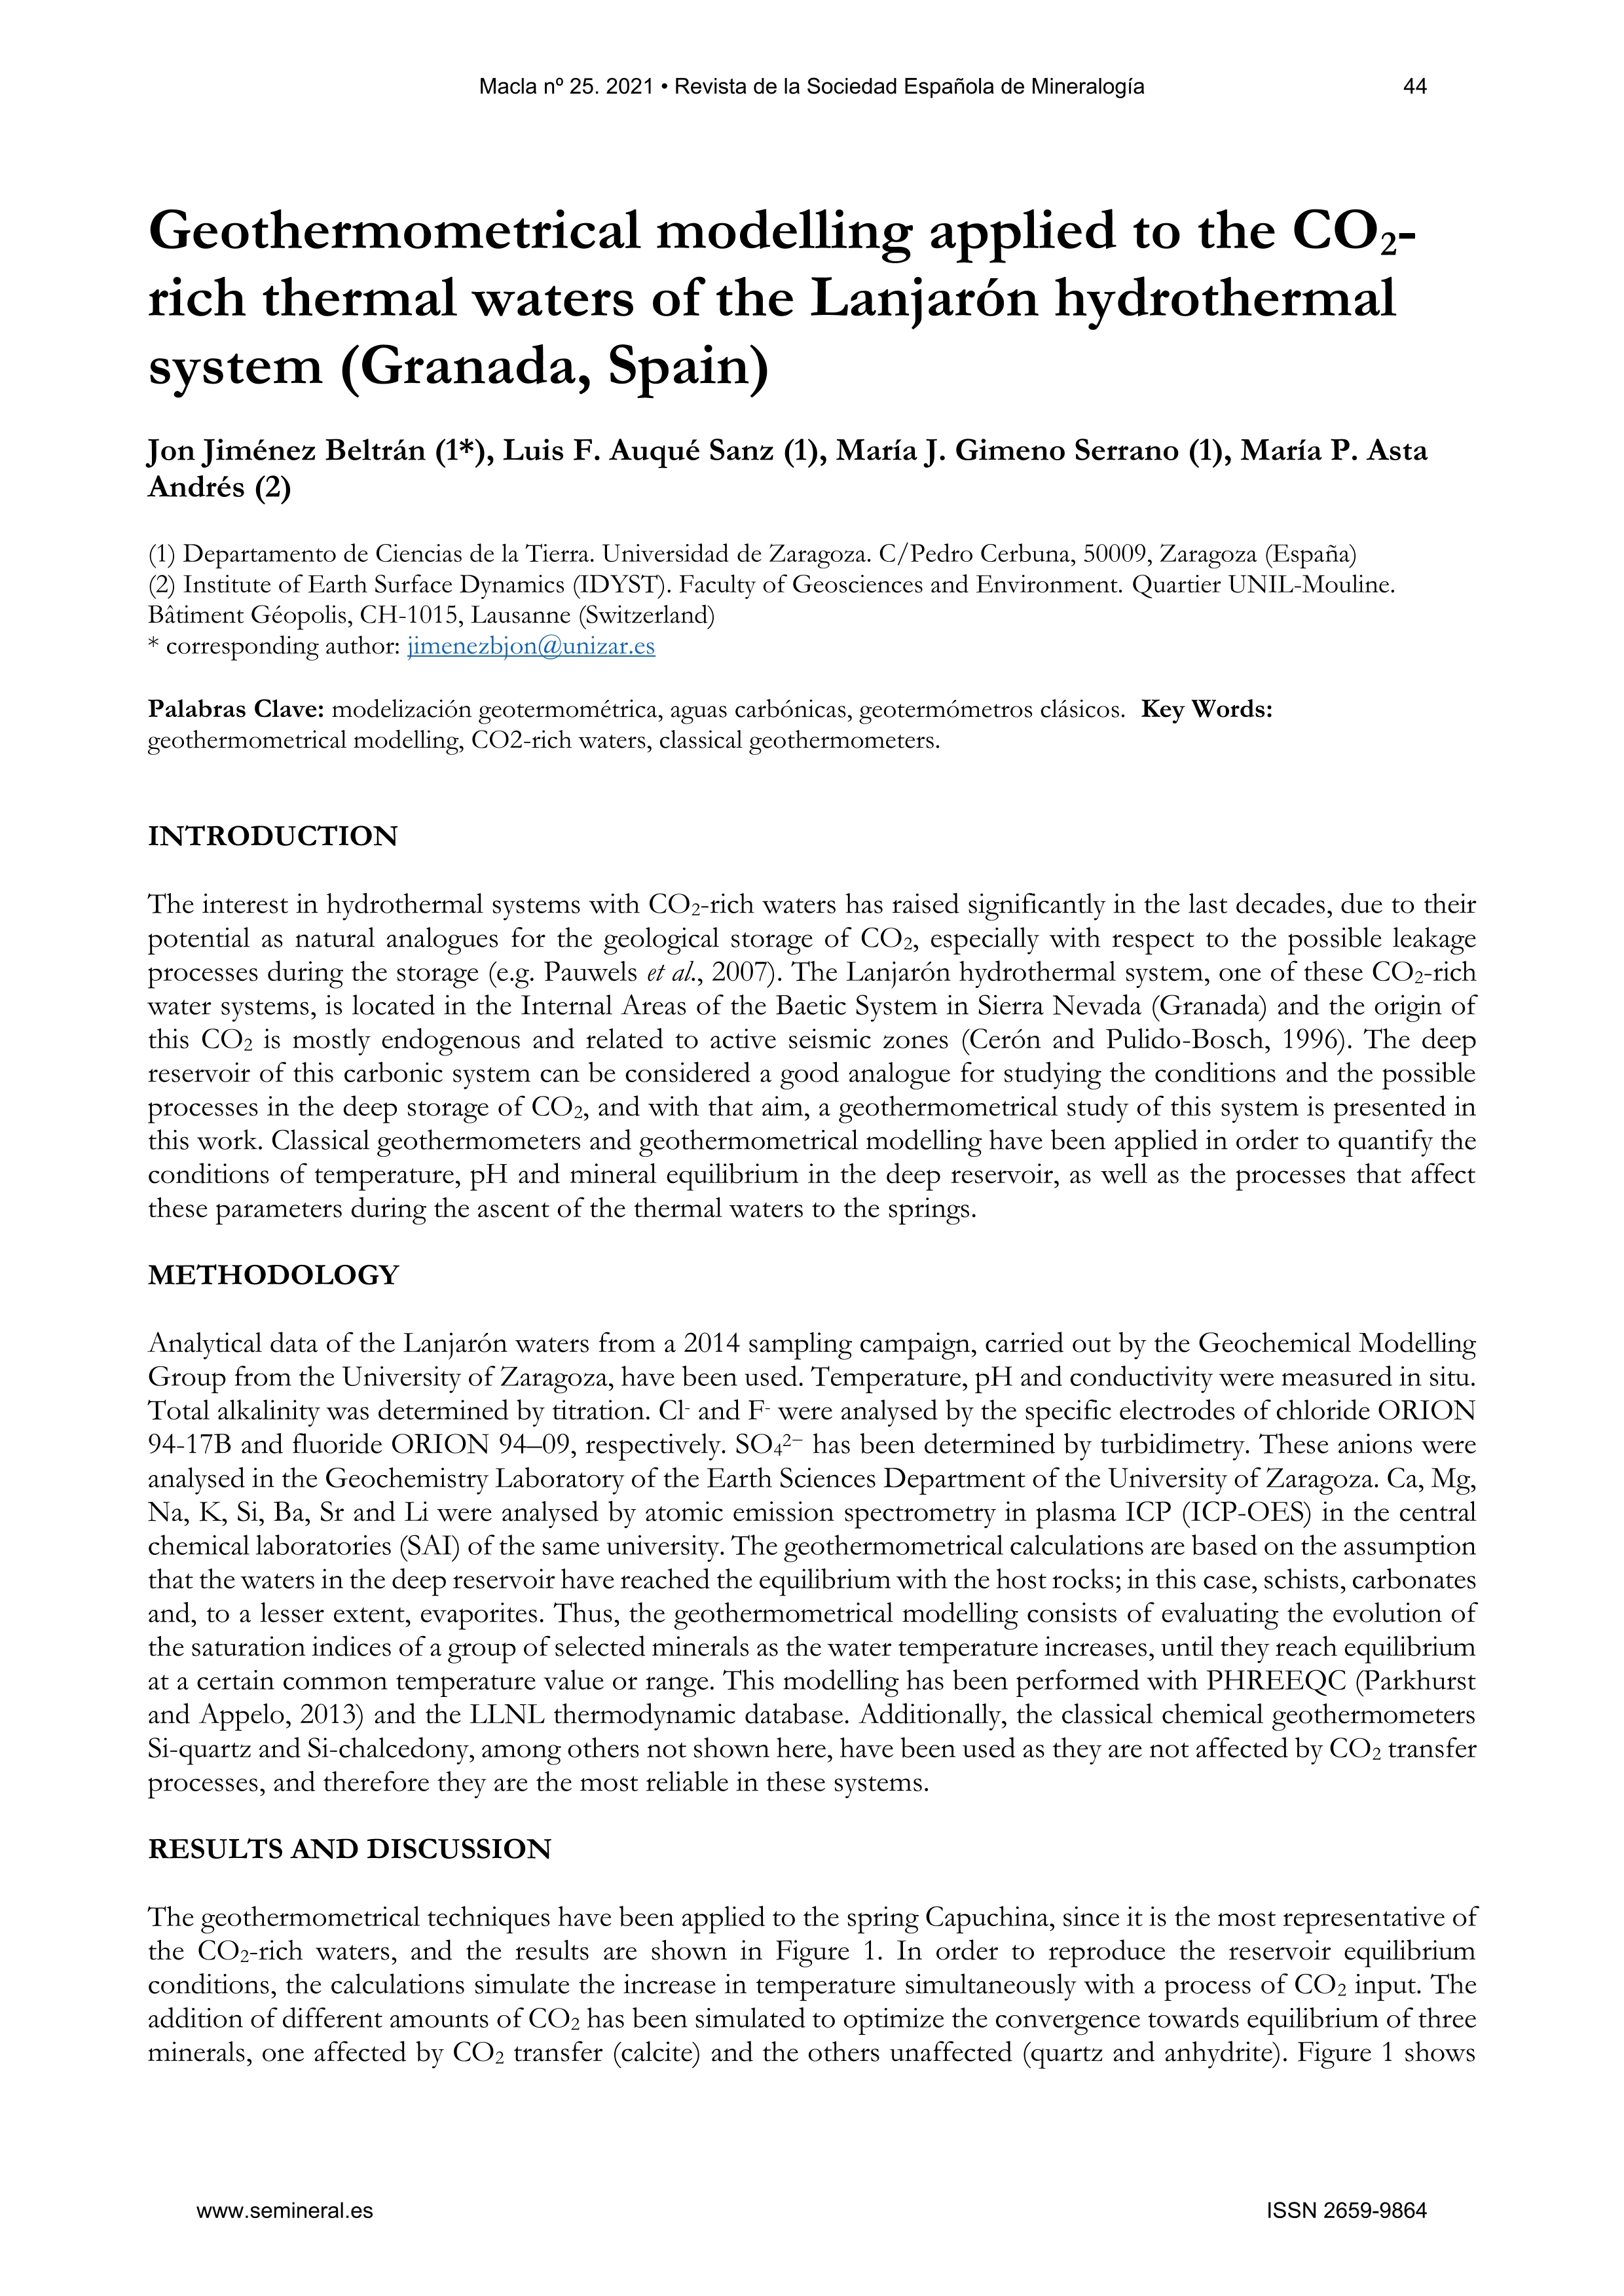 Geothermometrical modelling applied to the CO2-rich thermal waters of the Lanjarón hydrothermal system (Granada, Spain)